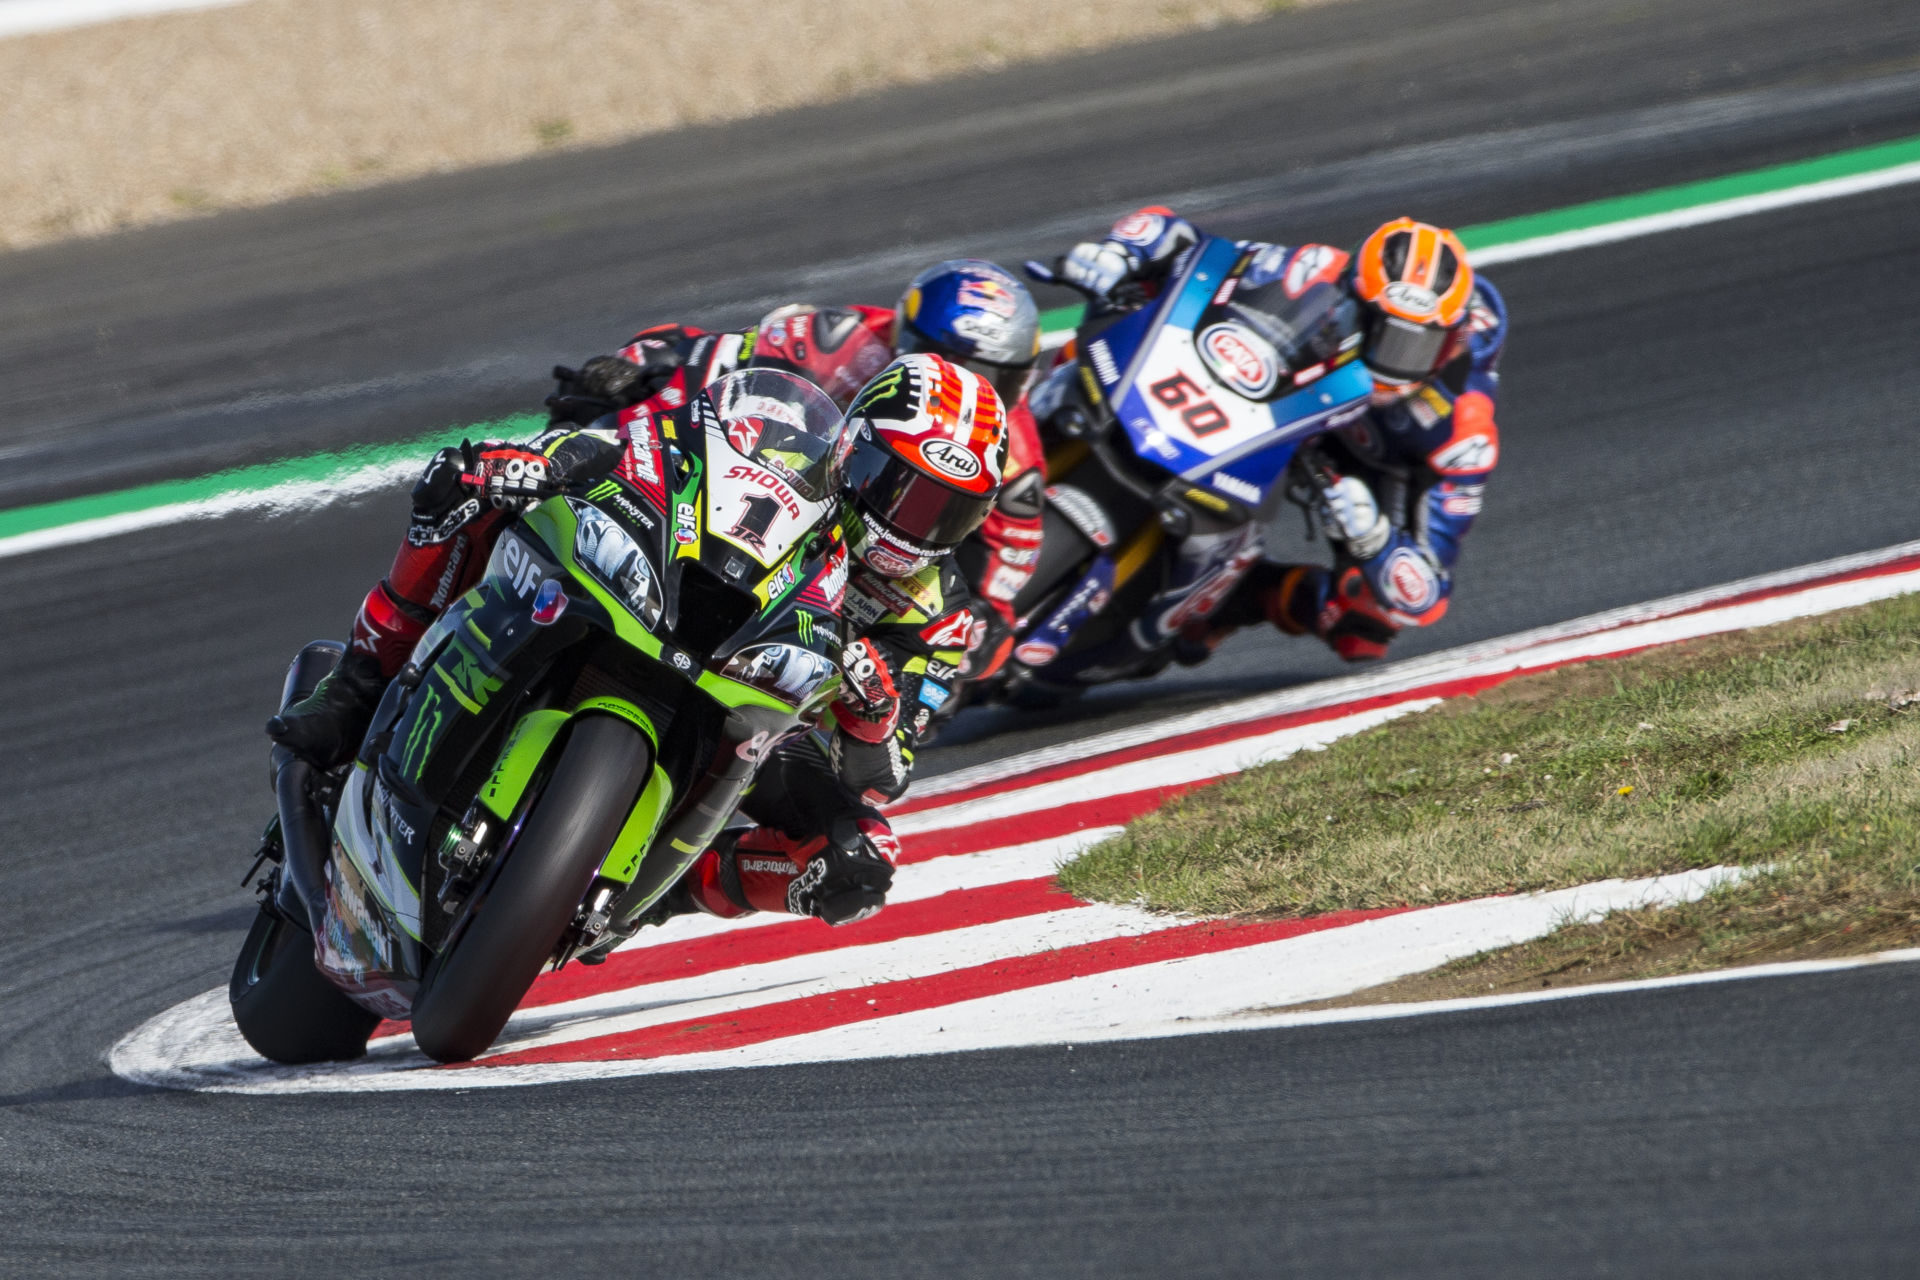 Although he has already clinched the 2019 Superbike World Championship, Jonathan Rea (1) is still looking to help secure the 2019 Team and Manufacturer Championships for Kawasaki.